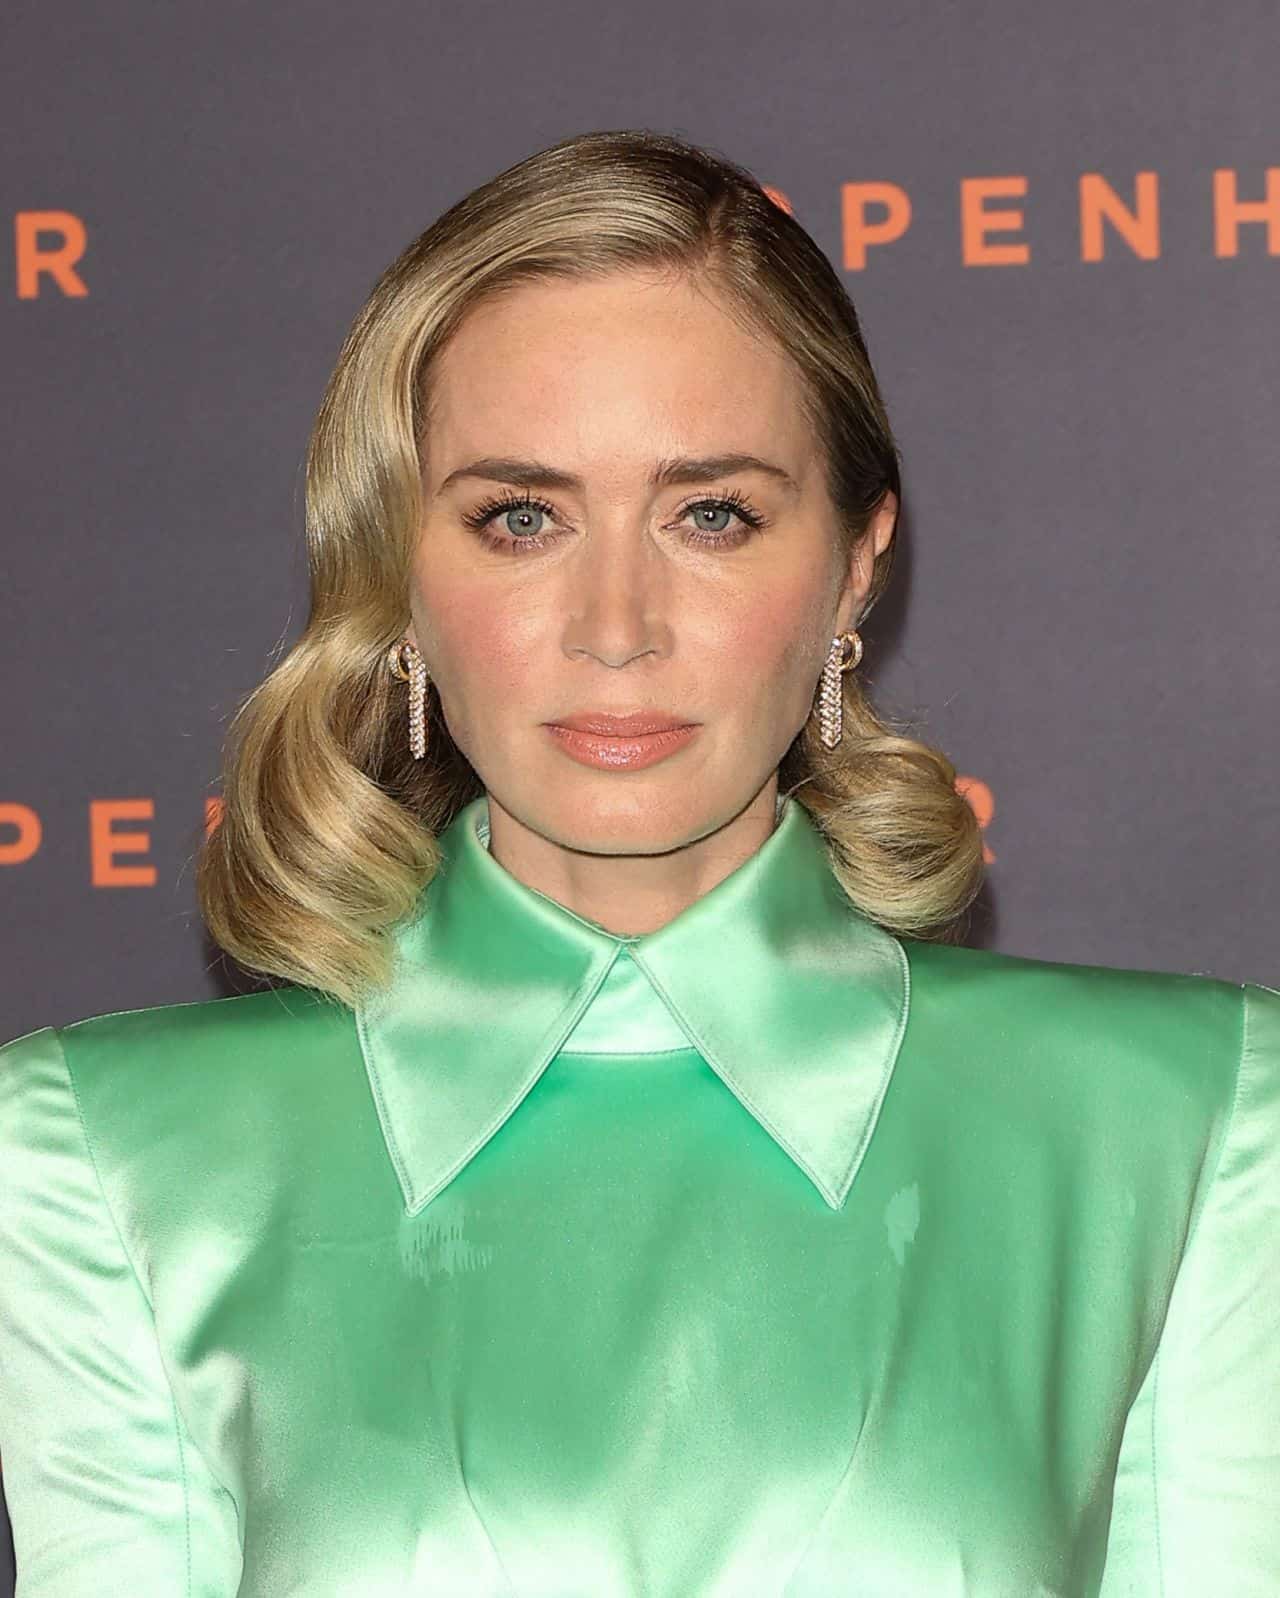 Emily Blunt Wears Green Satin Dress at the "Oppenheimer" Premiere in Paris